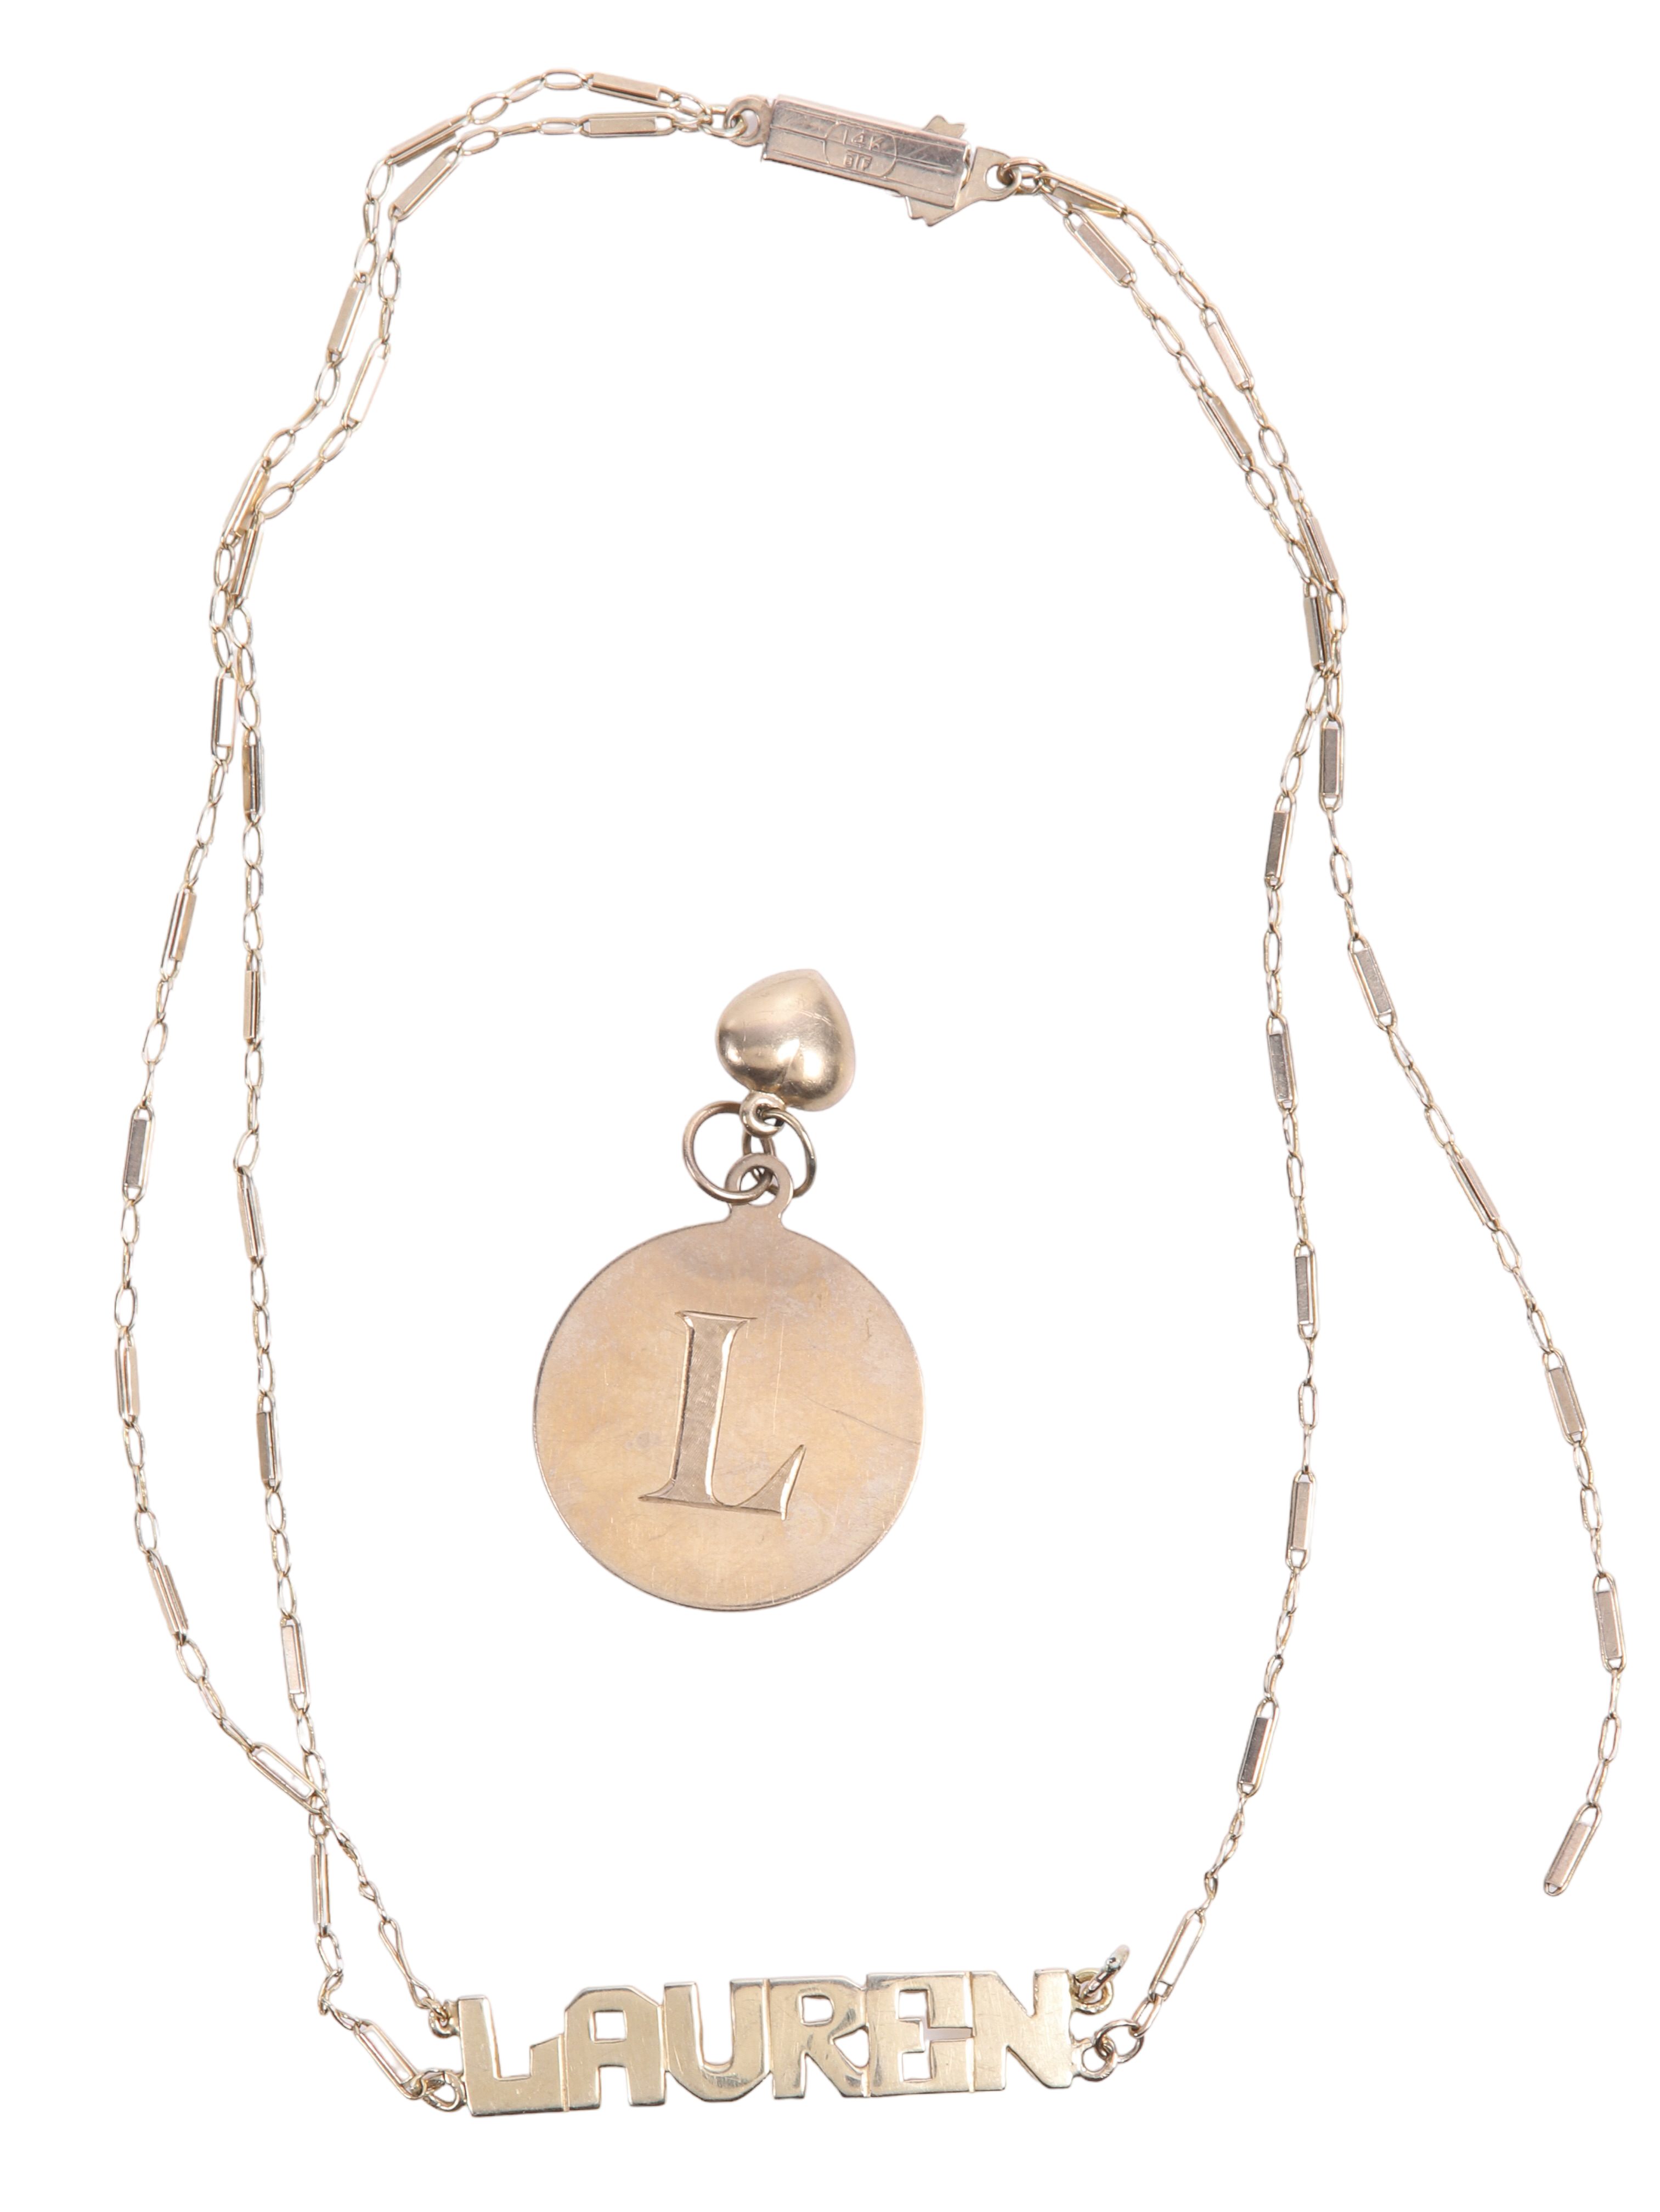 14K Yellow gold necklace and charm 2e159c